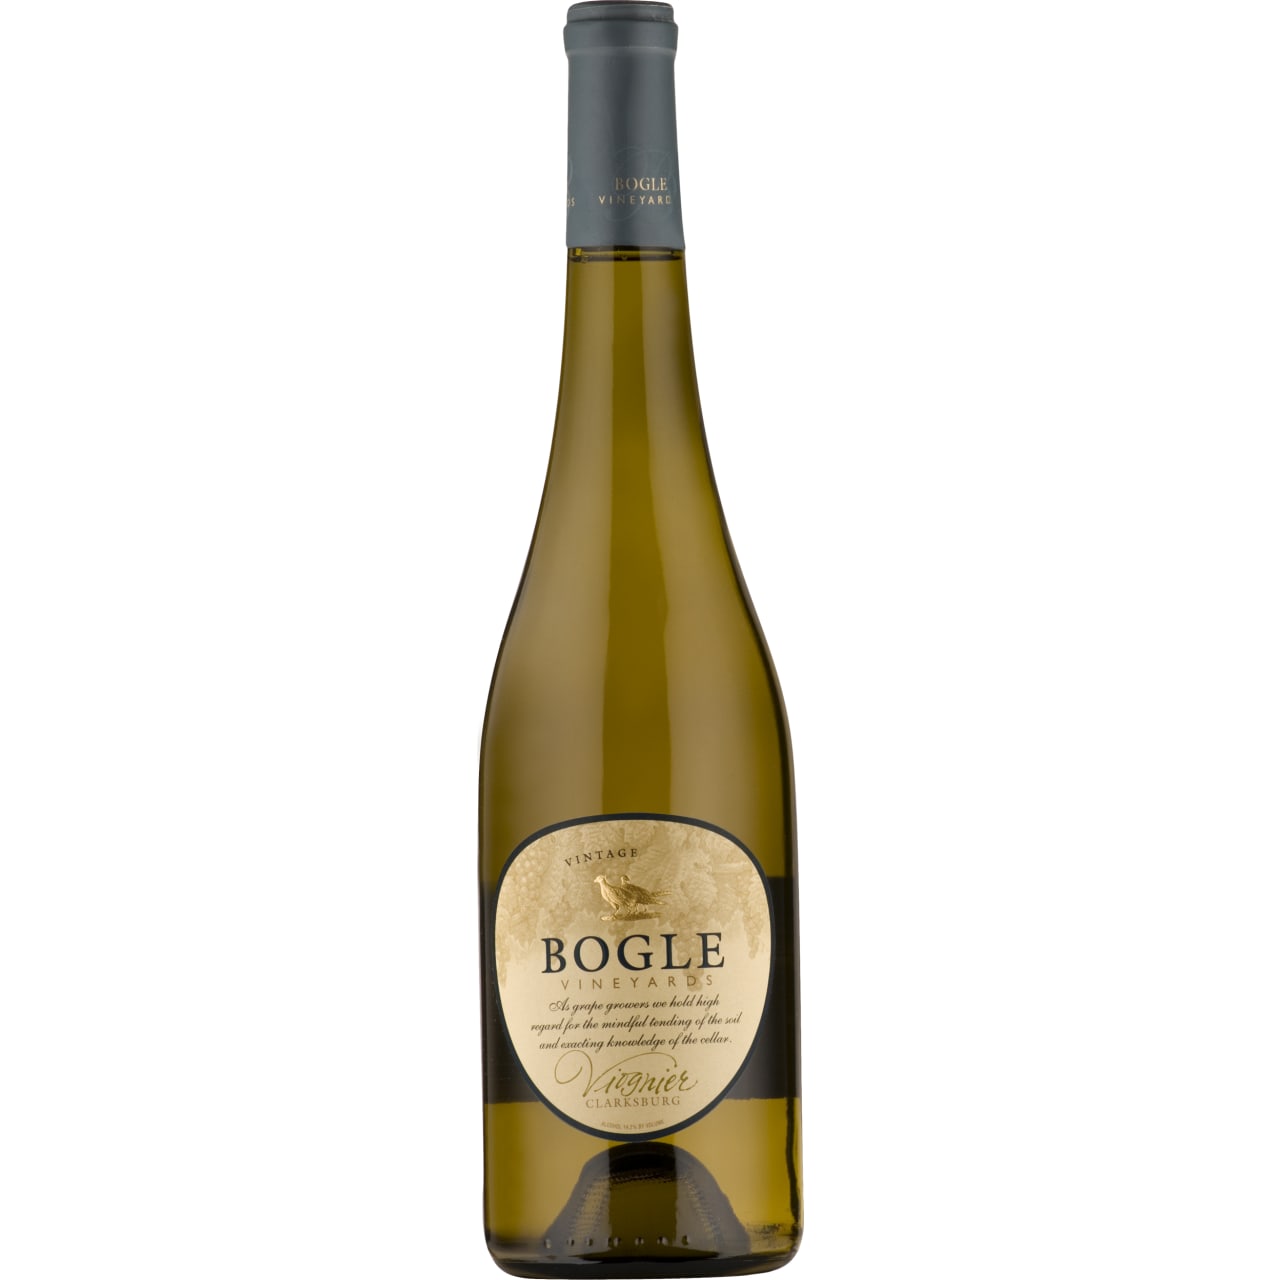 Luscious aromas of fresh apricot and pear. Another stunning wine from the Bogle family in the cool Sacramento delta of California.